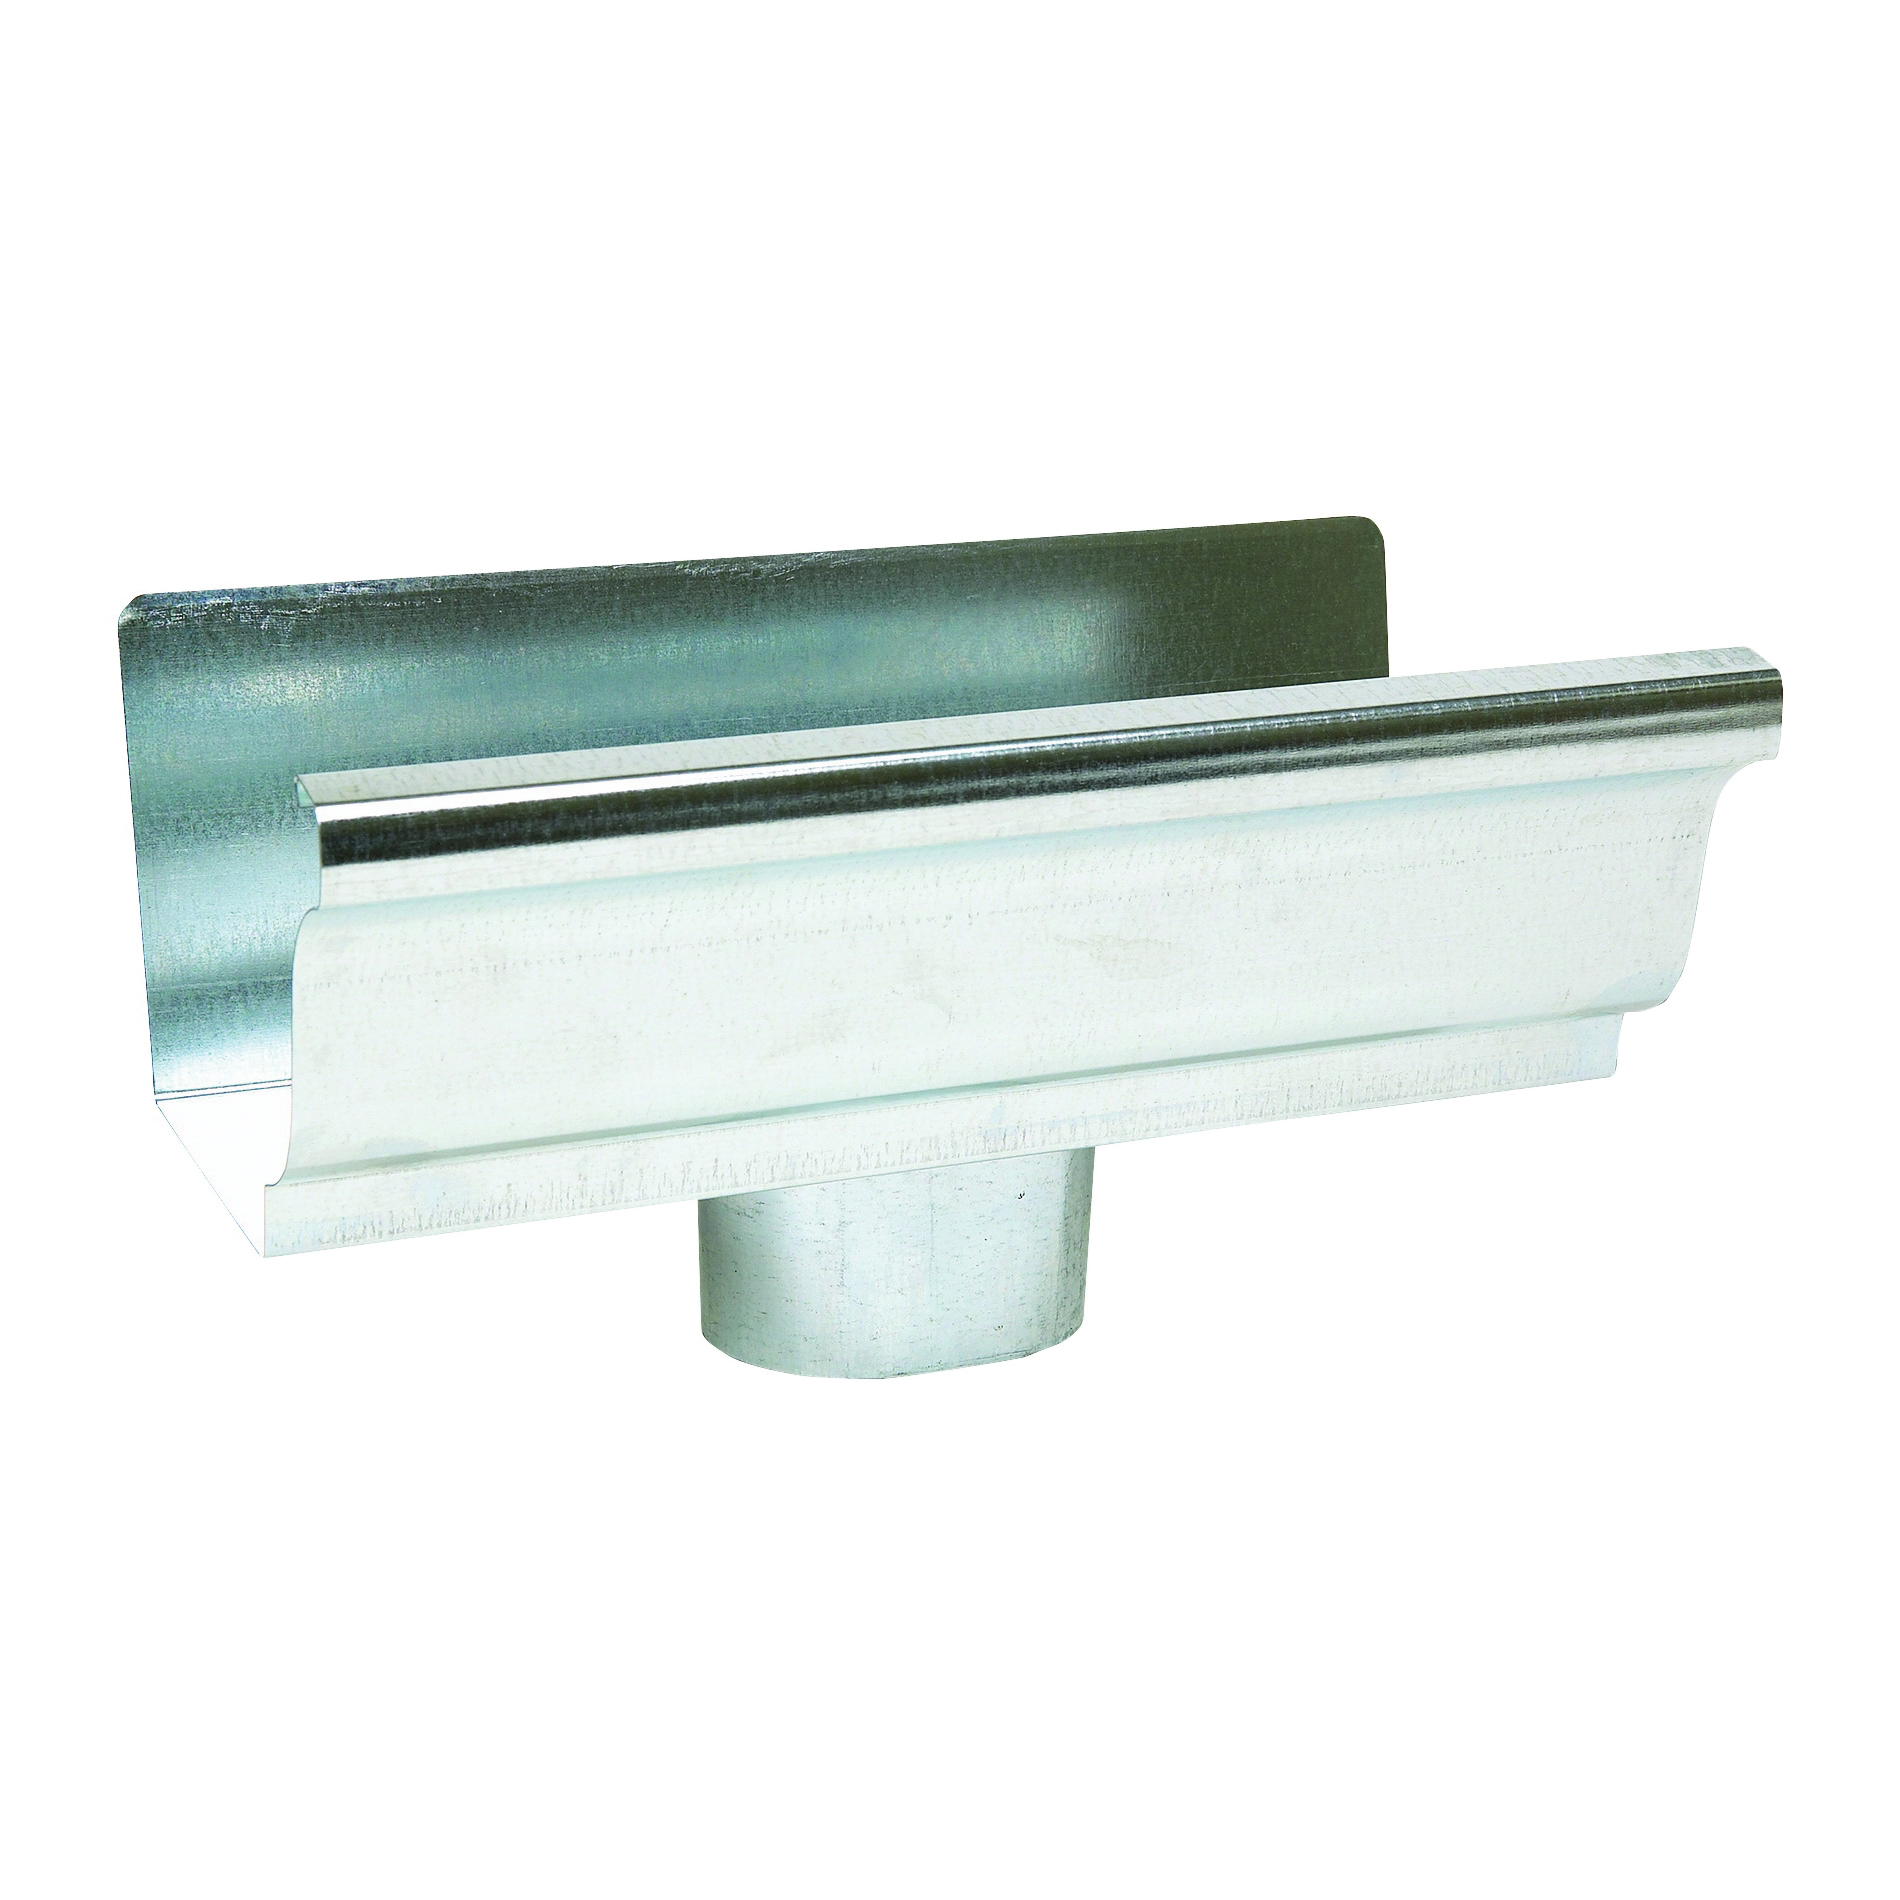 29010 Gutter End with Drop, 4 in L, 3 in W, Vinyl, For: 5 in K-Style Gutter System